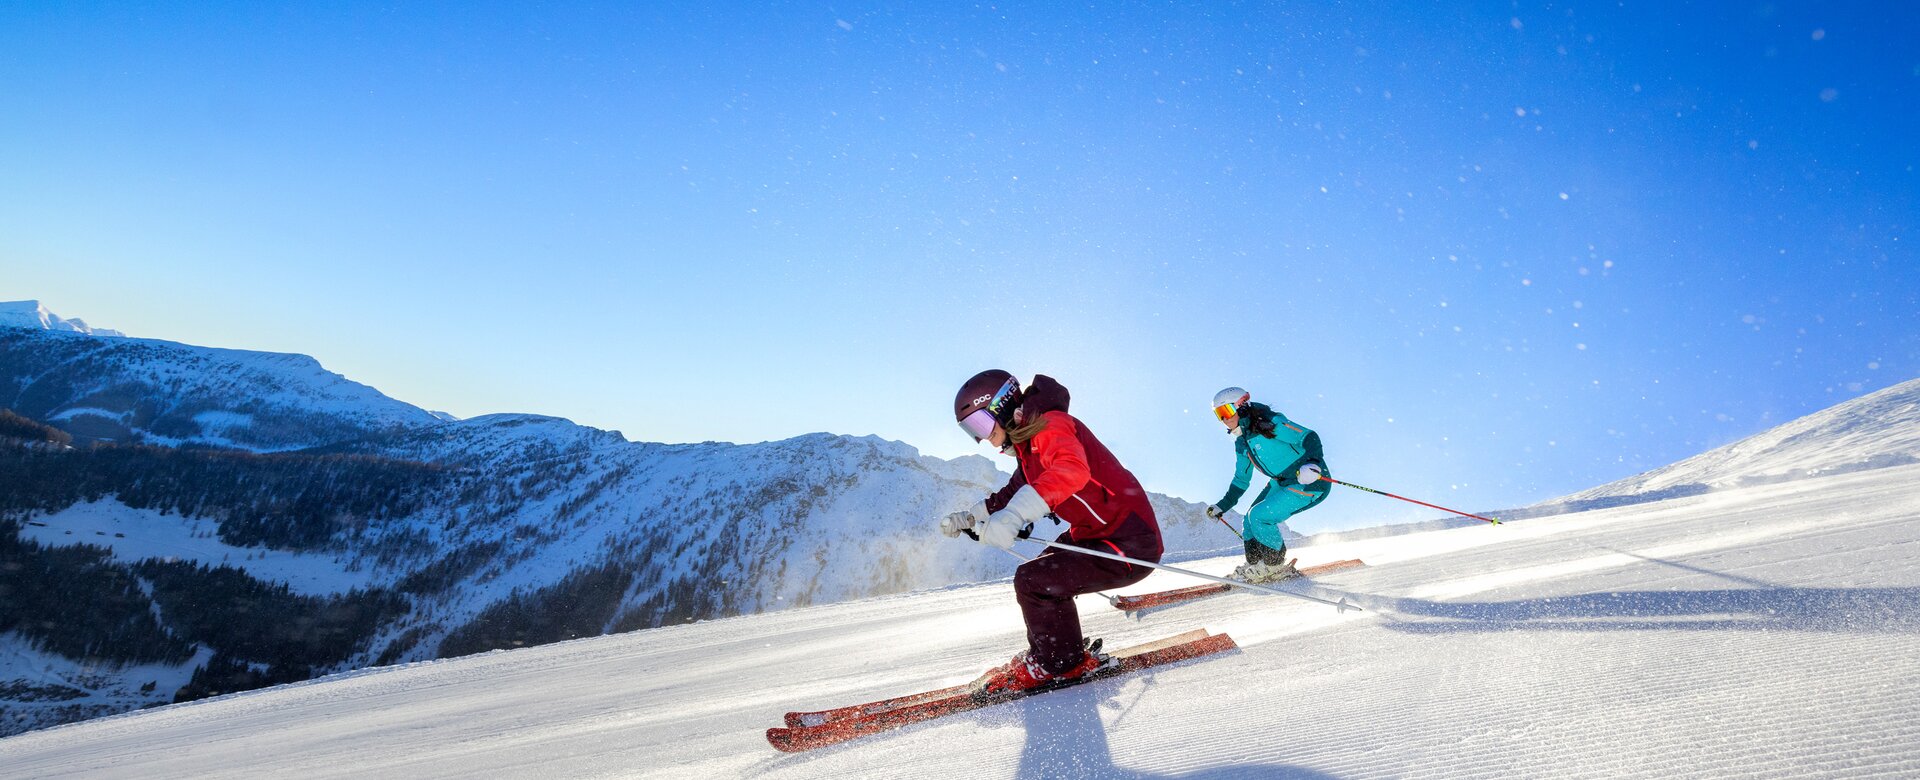 Two skiers, one in blue and the other in red, ski down the groomed piste with mountain peaks in the background